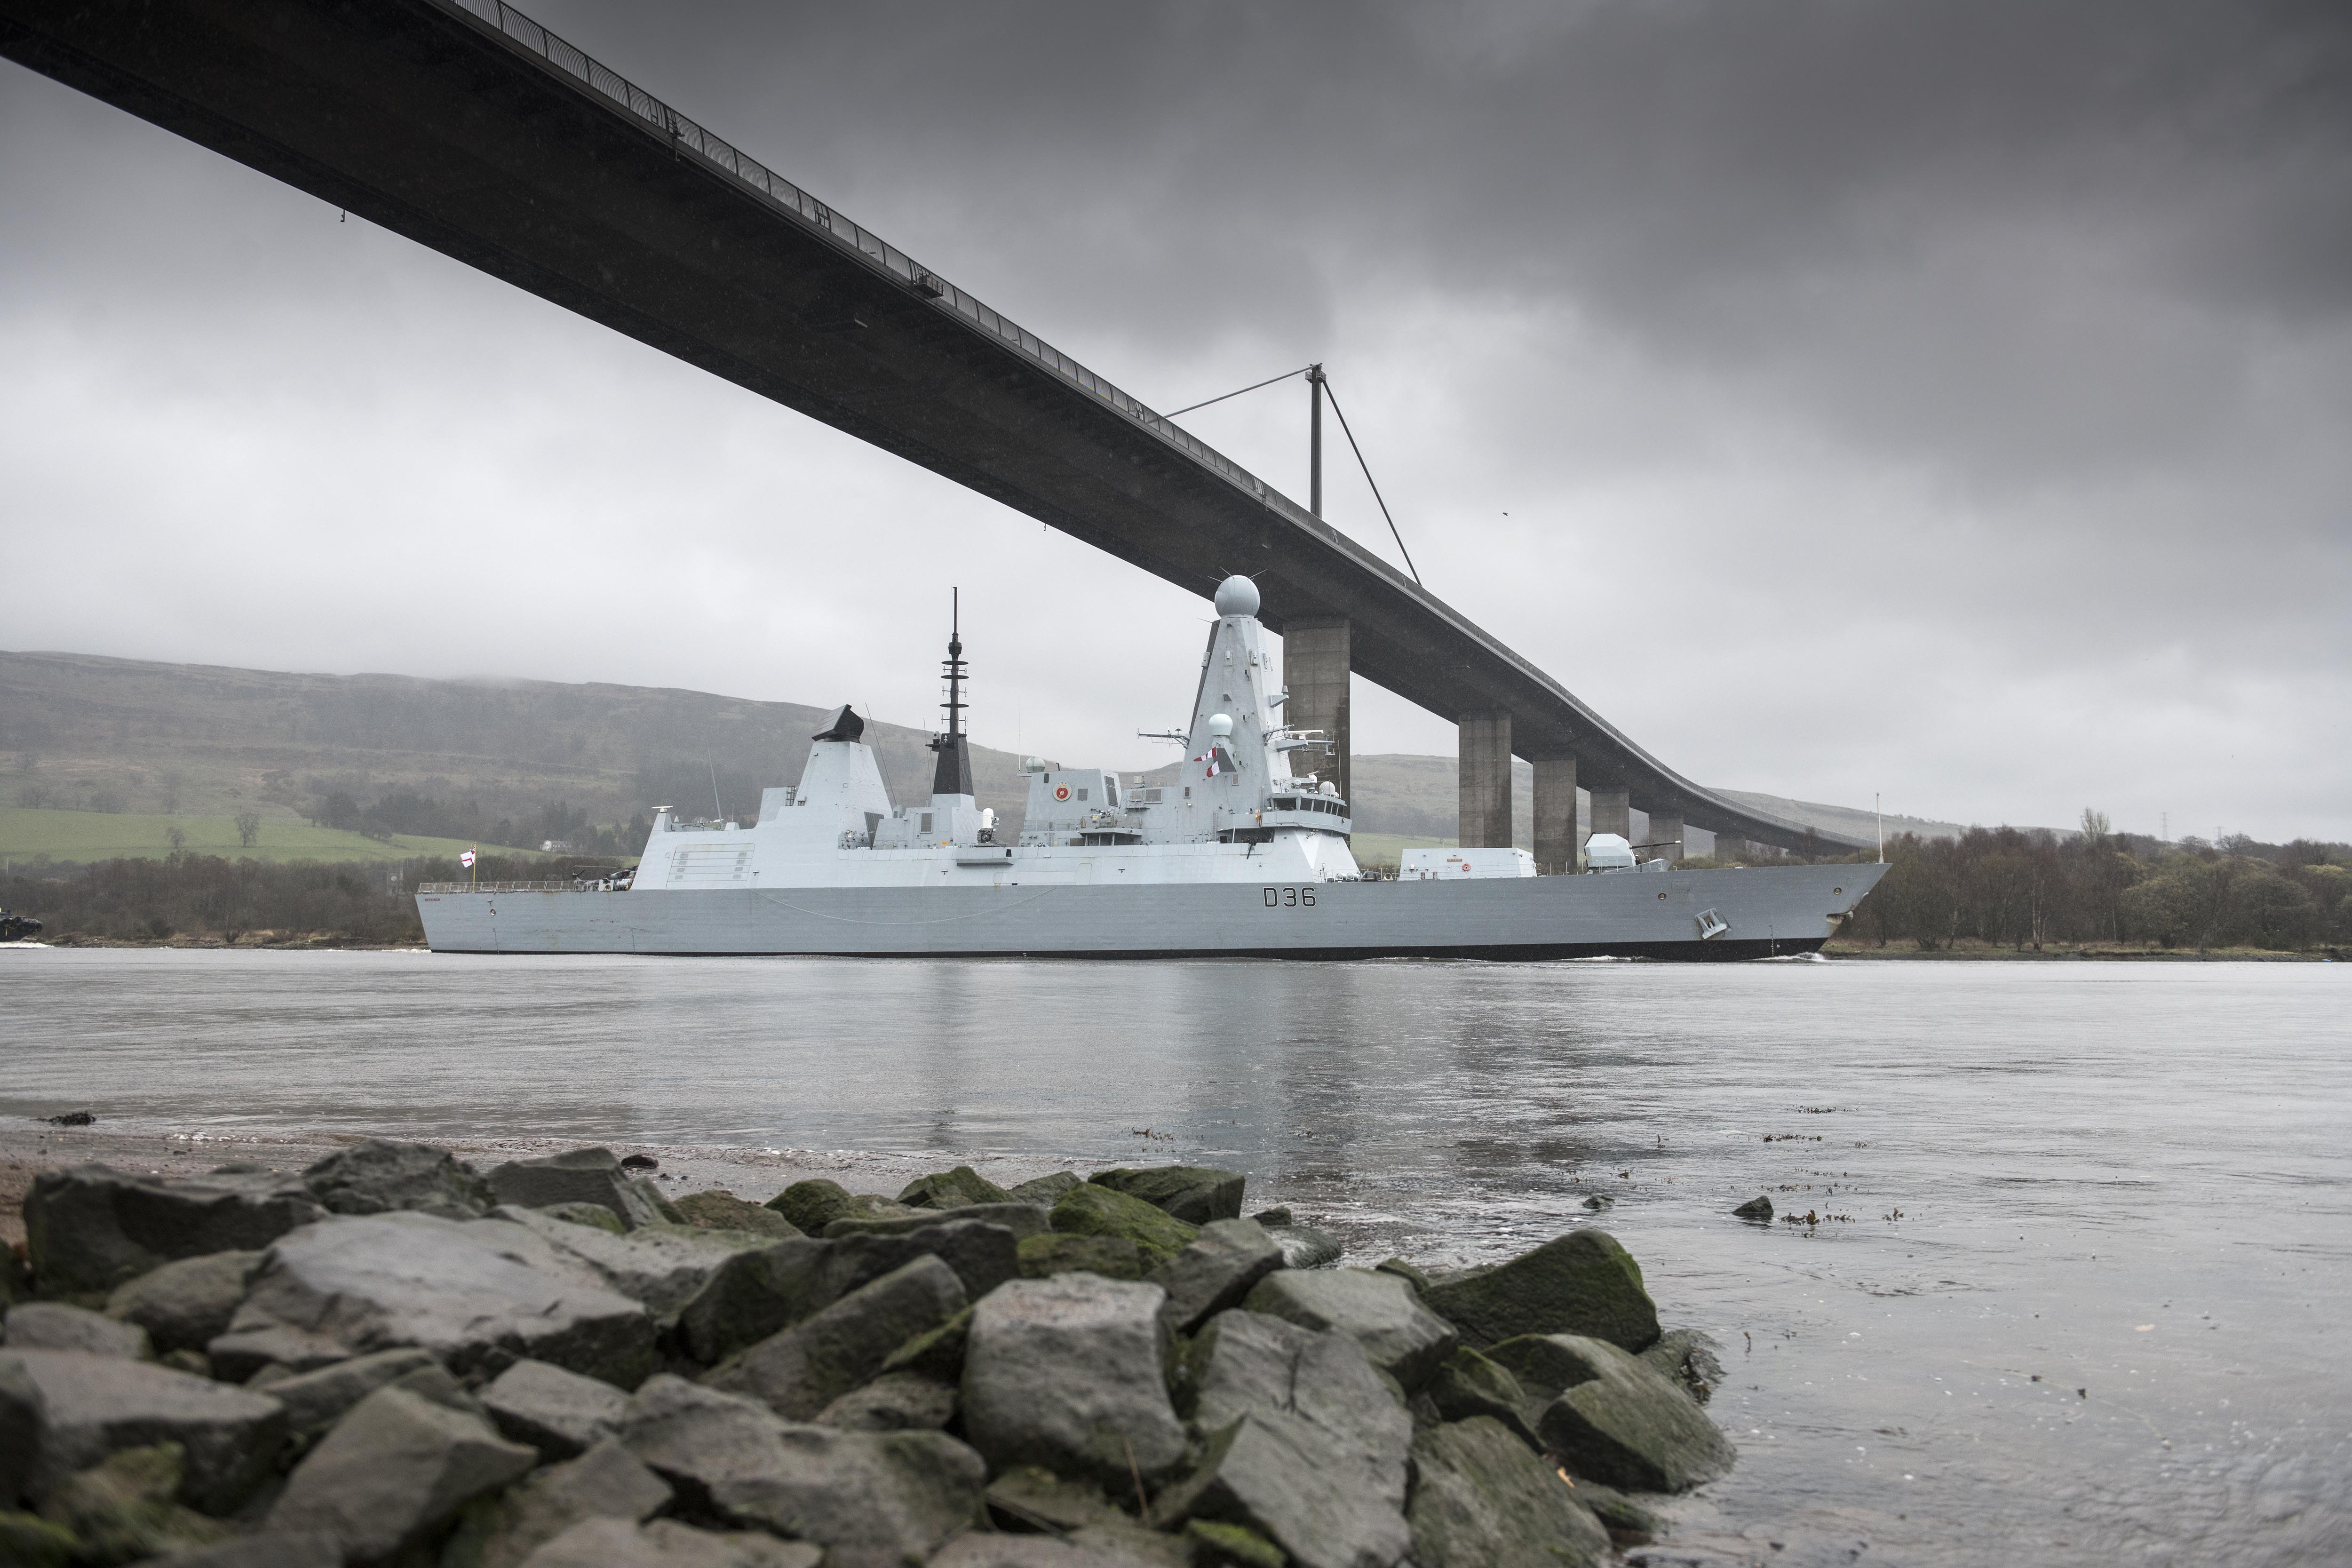 HMS Defender, a Royal Navy Type 45 Destroyer built in Clyde shipyard in 2013, passes under the Erskine Bridge on her return to Glasgow. The ship is berthed at King George V Dock, around a mile away from where it was built and launched, and is open to visitors all weekend